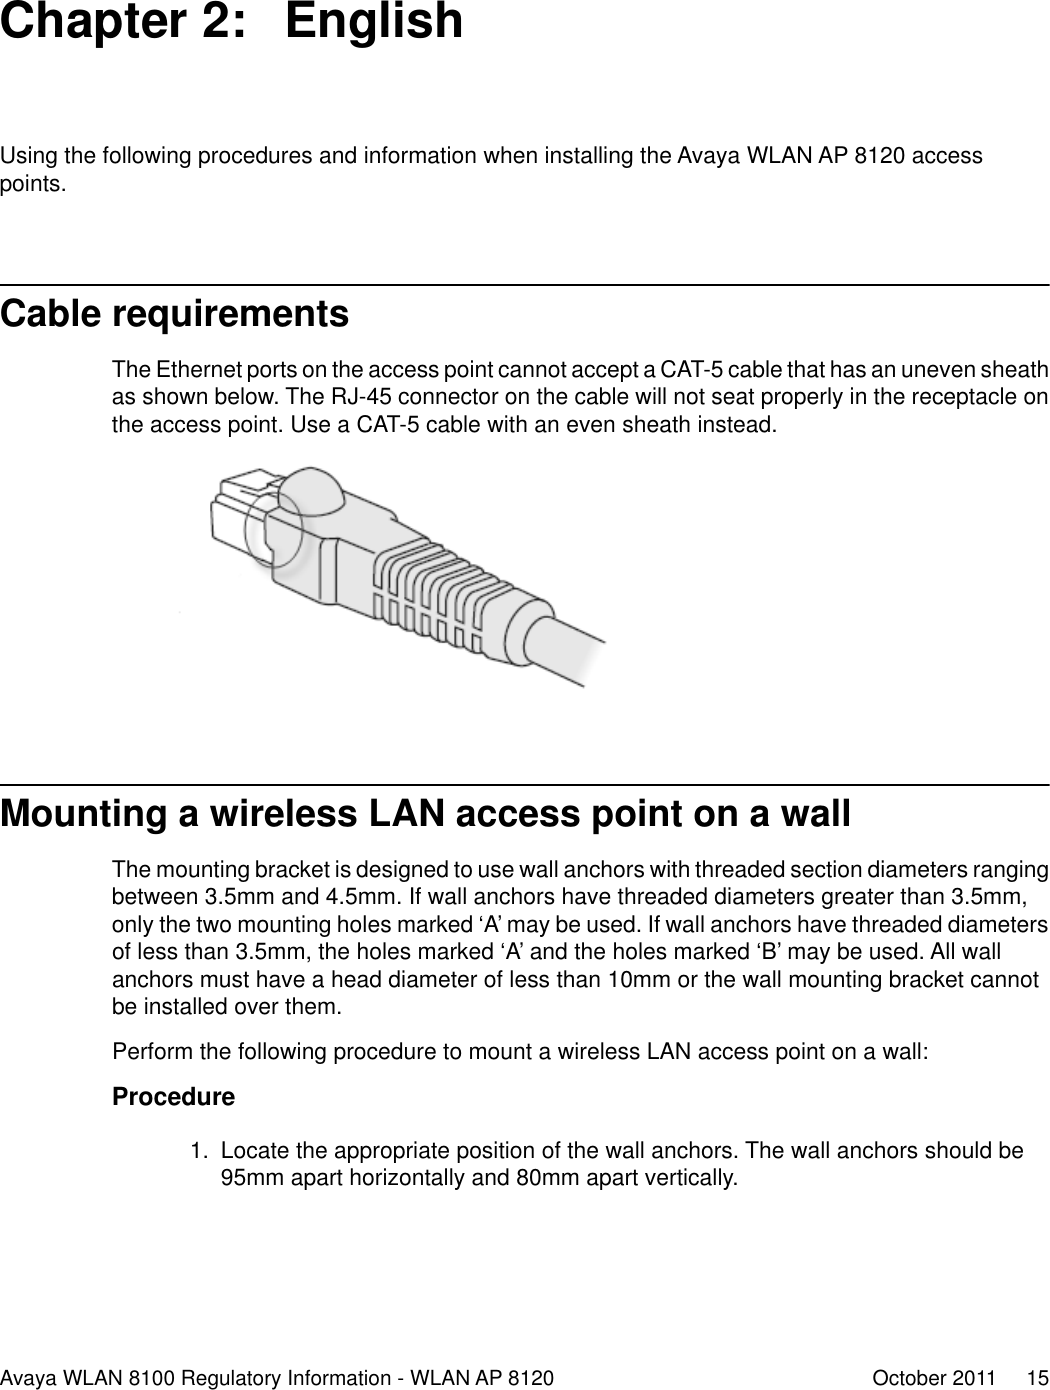 Chapter 2:  EnglishUsing the following procedures and information when installing the Avaya WLAN AP 8120 accesspoints.Cable requirementsThe Ethernet ports on the access point cannot accept a CAT-5 cable that has an uneven sheathas shown below. The RJ-45 connector on the cable will not seat properly in the receptacle onthe access point. Use a CAT-5 cable with an even sheath instead.Mounting a wireless LAN access point on a wallThe mounting bracket is designed to use wall anchors with threaded section diameters rangingbetween 3.5mm and 4.5mm. If wall anchors have threaded diameters greater than 3.5mm,only the two mounting holes marked ‘A’ may be used. If wall anchors have threaded diametersof less than 3.5mm, the holes marked ‘A’ and the holes marked ‘B’ may be used. All wallanchors must have a head diameter of less than 10mm or the wall mounting bracket cannotbe installed over them.Perform the following procedure to mount a wireless LAN access point on a wall:Procedure1. Locate the appropriate position of the wall anchors. The wall anchors should be95mm apart horizontally and 80mm apart vertically.Avaya WLAN 8100 Regulatory Information - WLAN AP 8120 October 2011     15